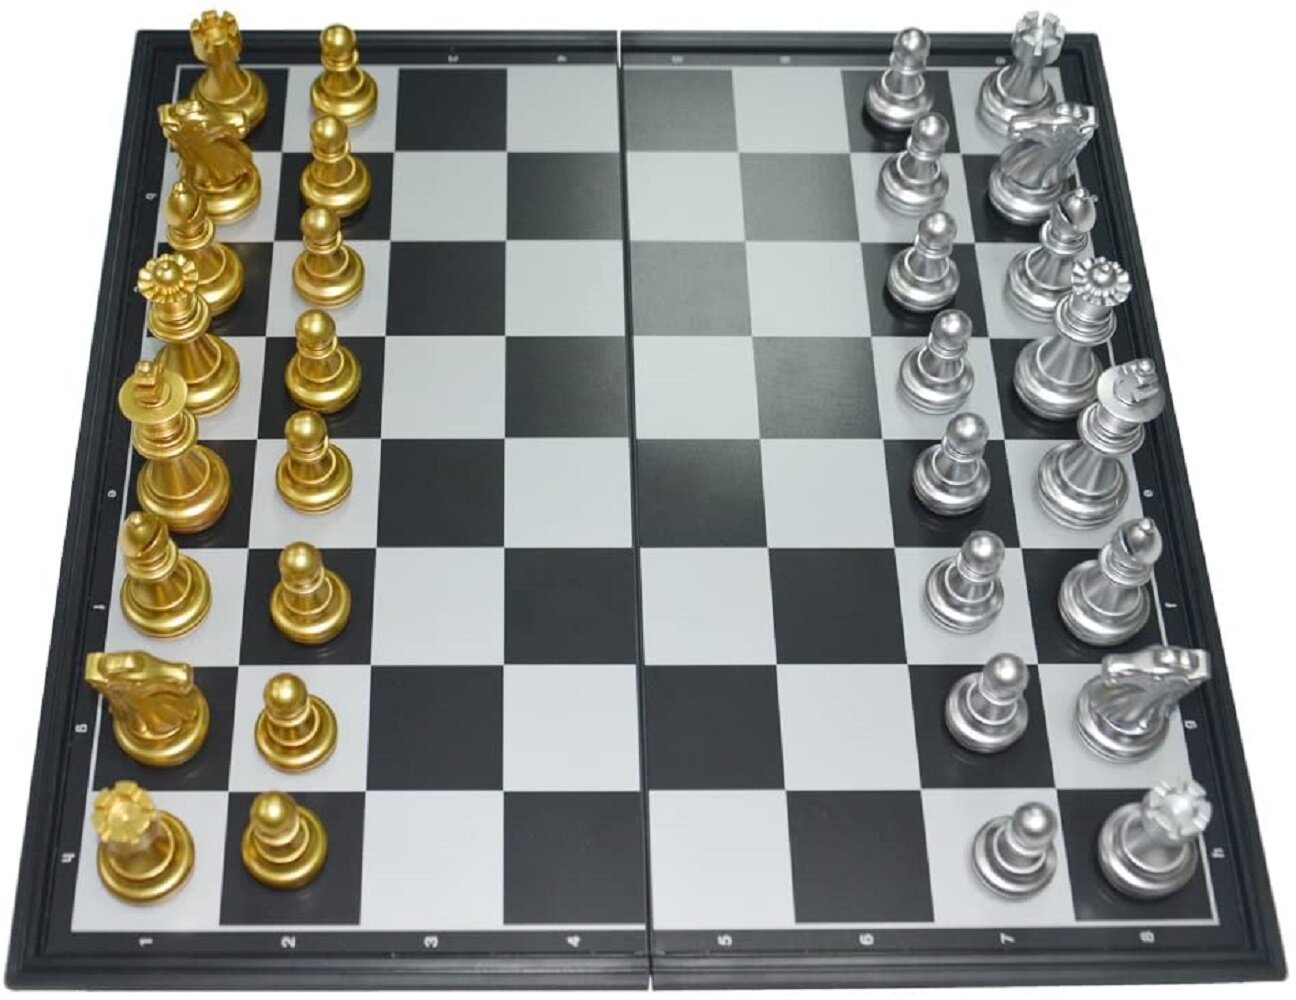 Four Player Chess Set With Soft Chess Board 64 Chessman for Kids and Adults 